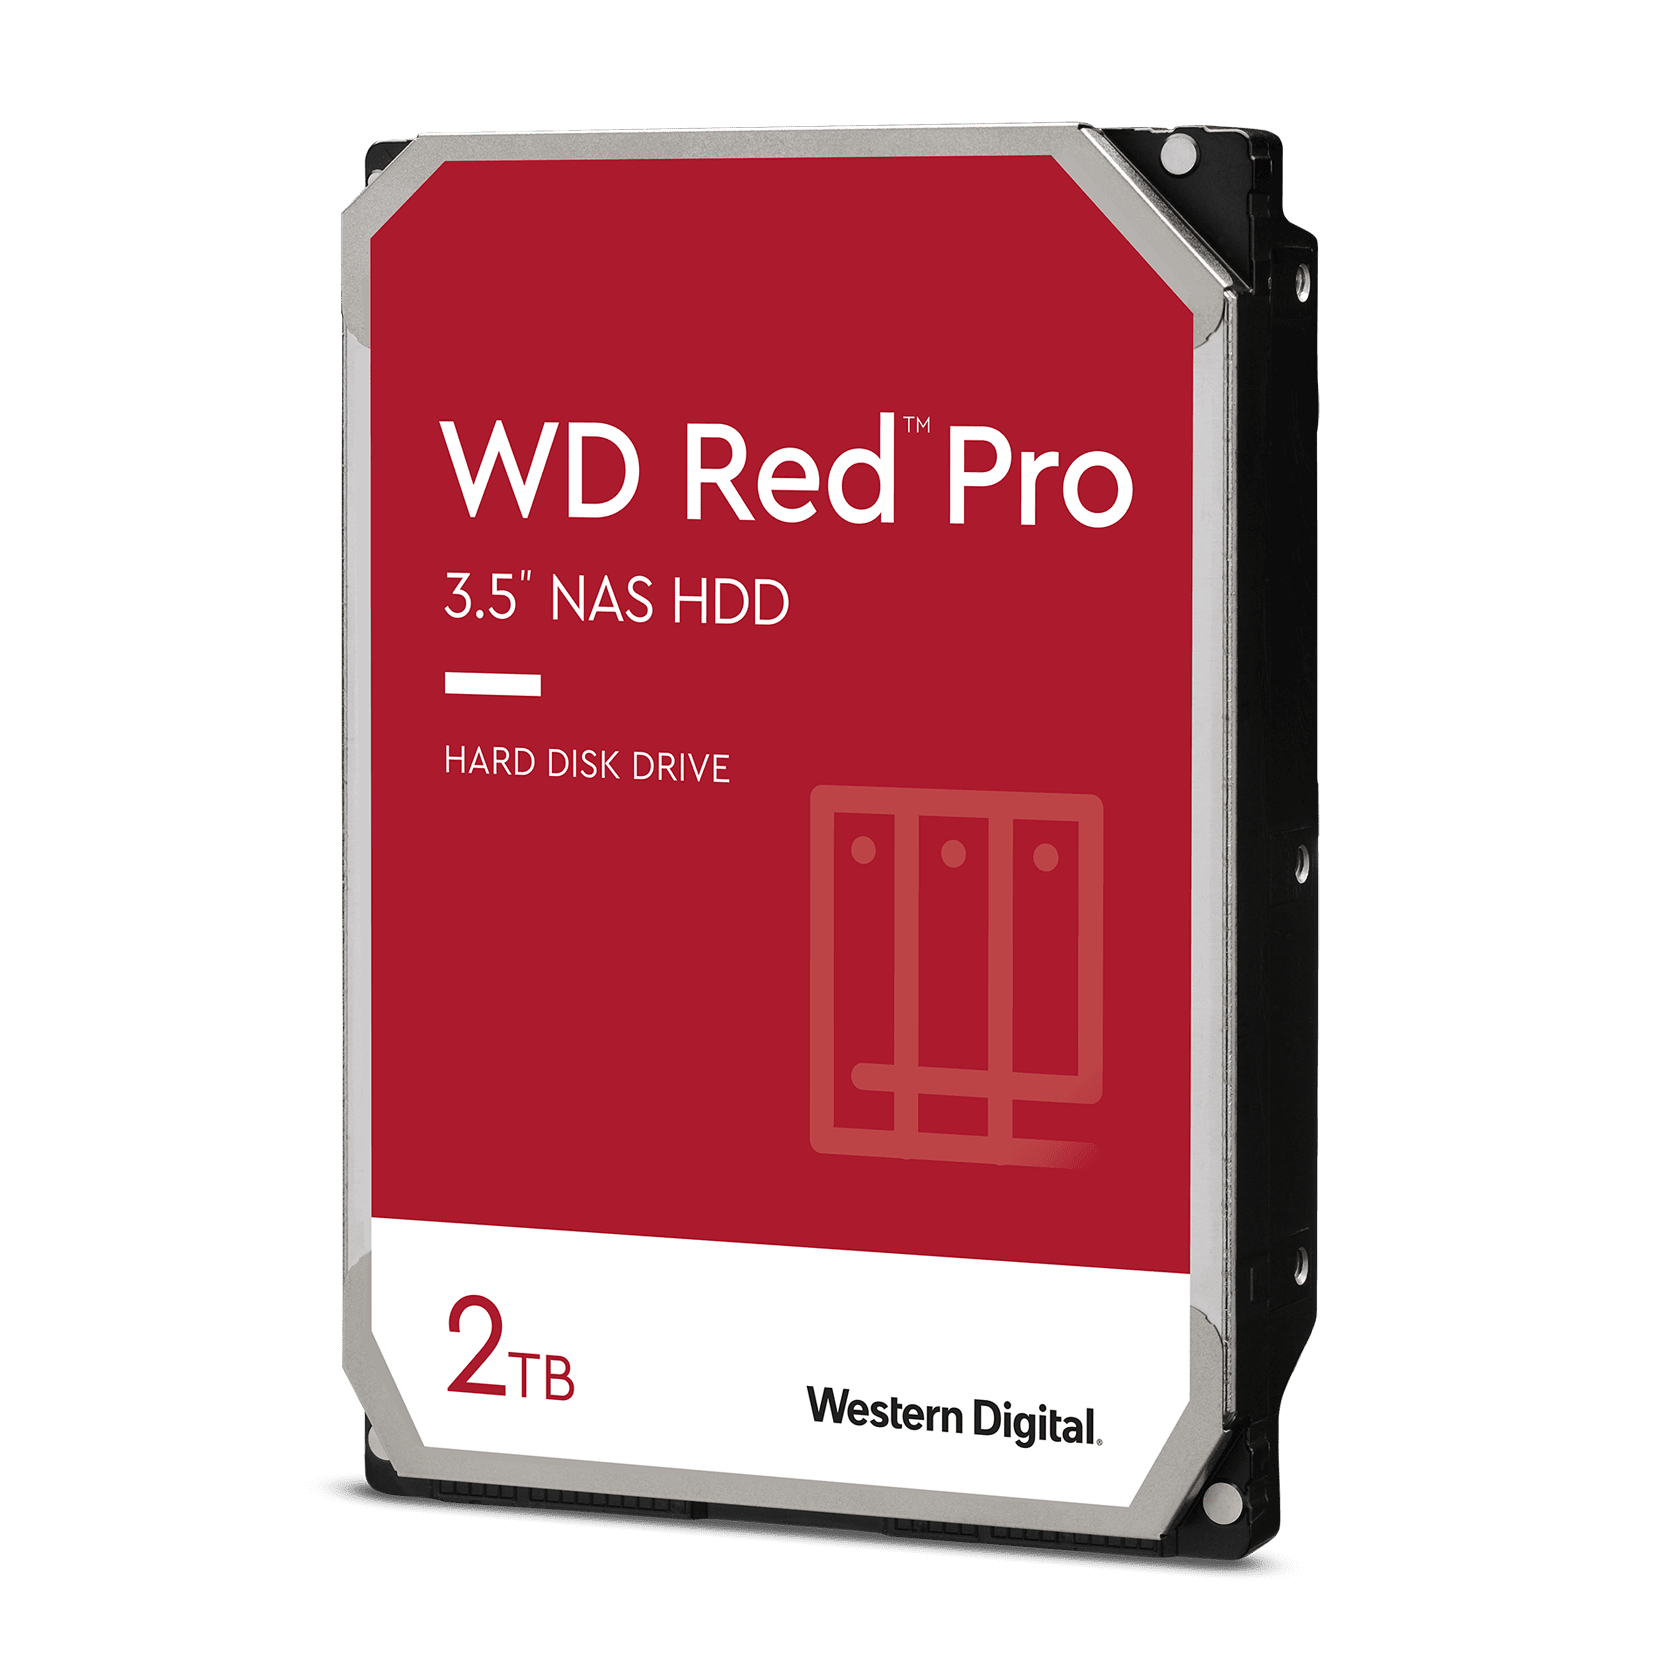 HD 3,5 2TB 7200RPM 64MB SATA3 RED WD RED PRO NAS